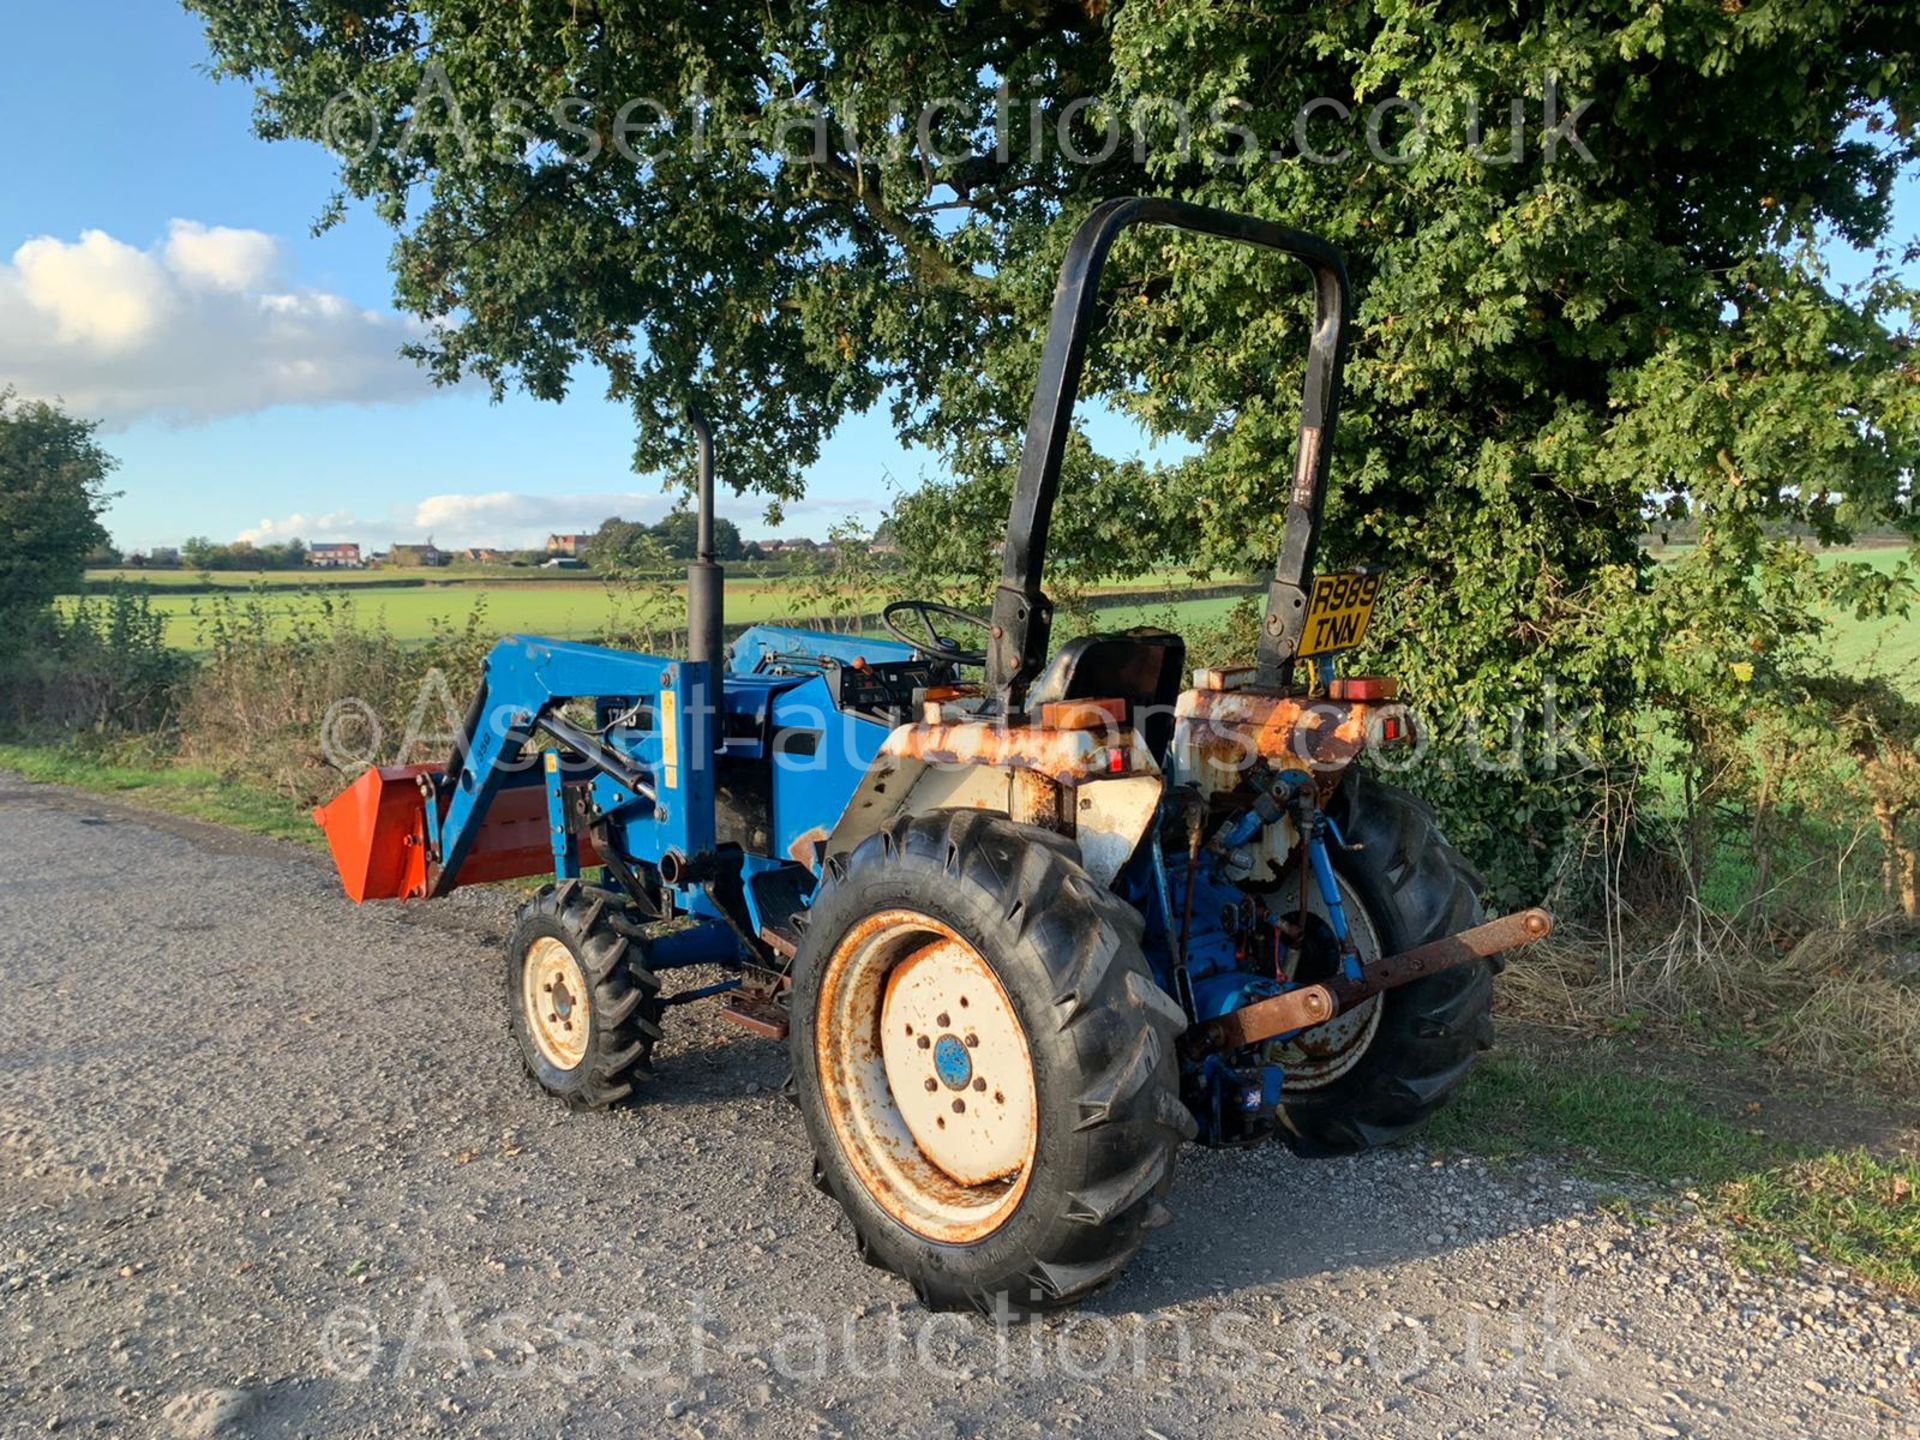 FORD 1720 28hp 4WD COMPACT TRACTOR WITH LEWIS 35Q FRONT LOADER AND BUCKET, RUNS DRIVES LIFTS WELL - Image 6 of 11